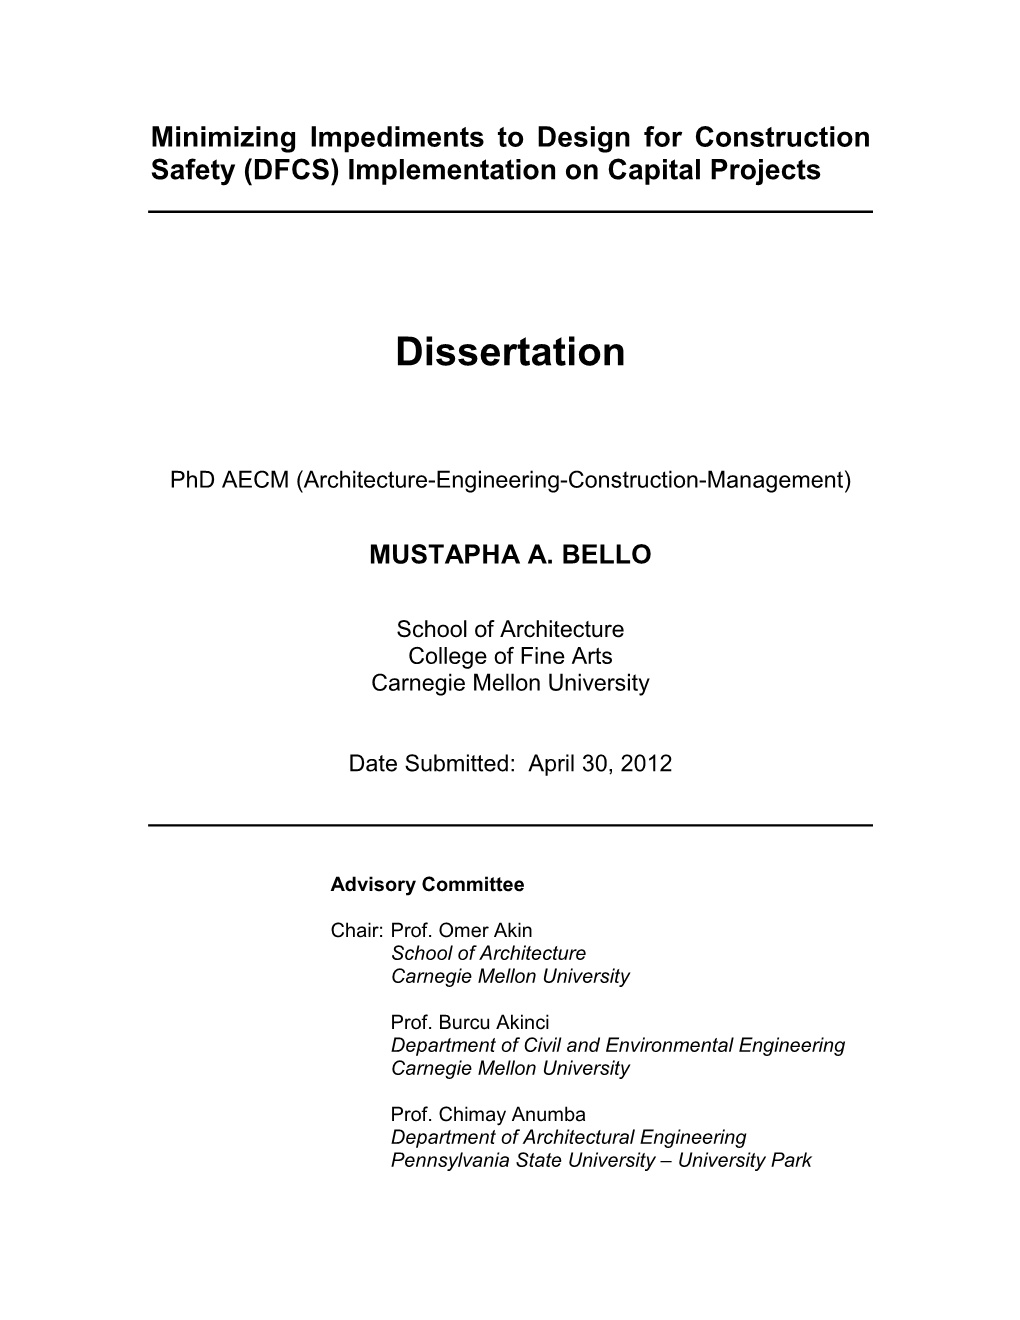 Minimizing Impediments to Design for Construction Safety (DFCS) Implementation on Capital Projects